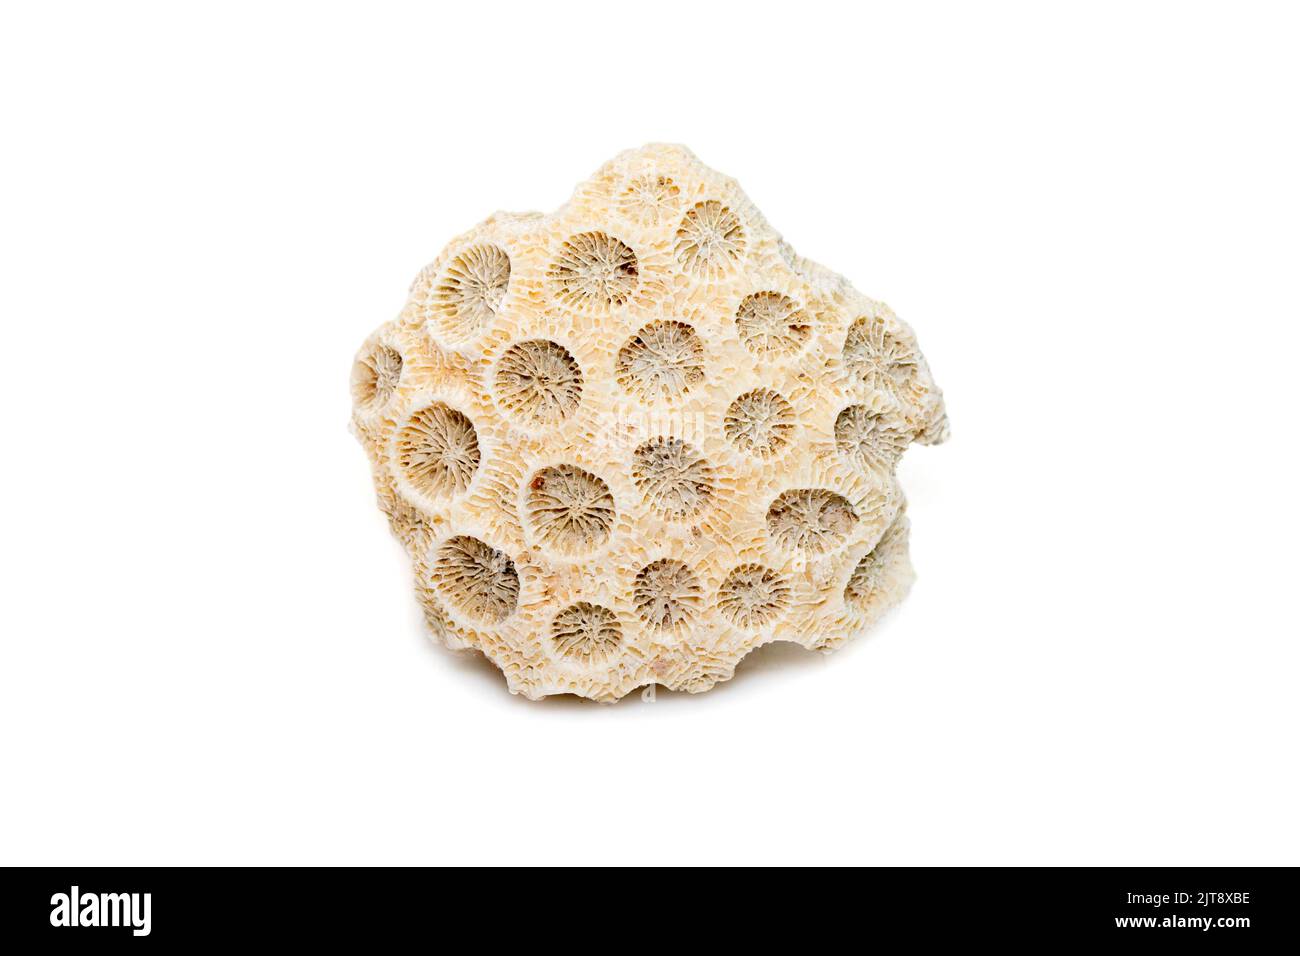 Image of coral cubes on a white background. Undersea Animals. Stock Photo